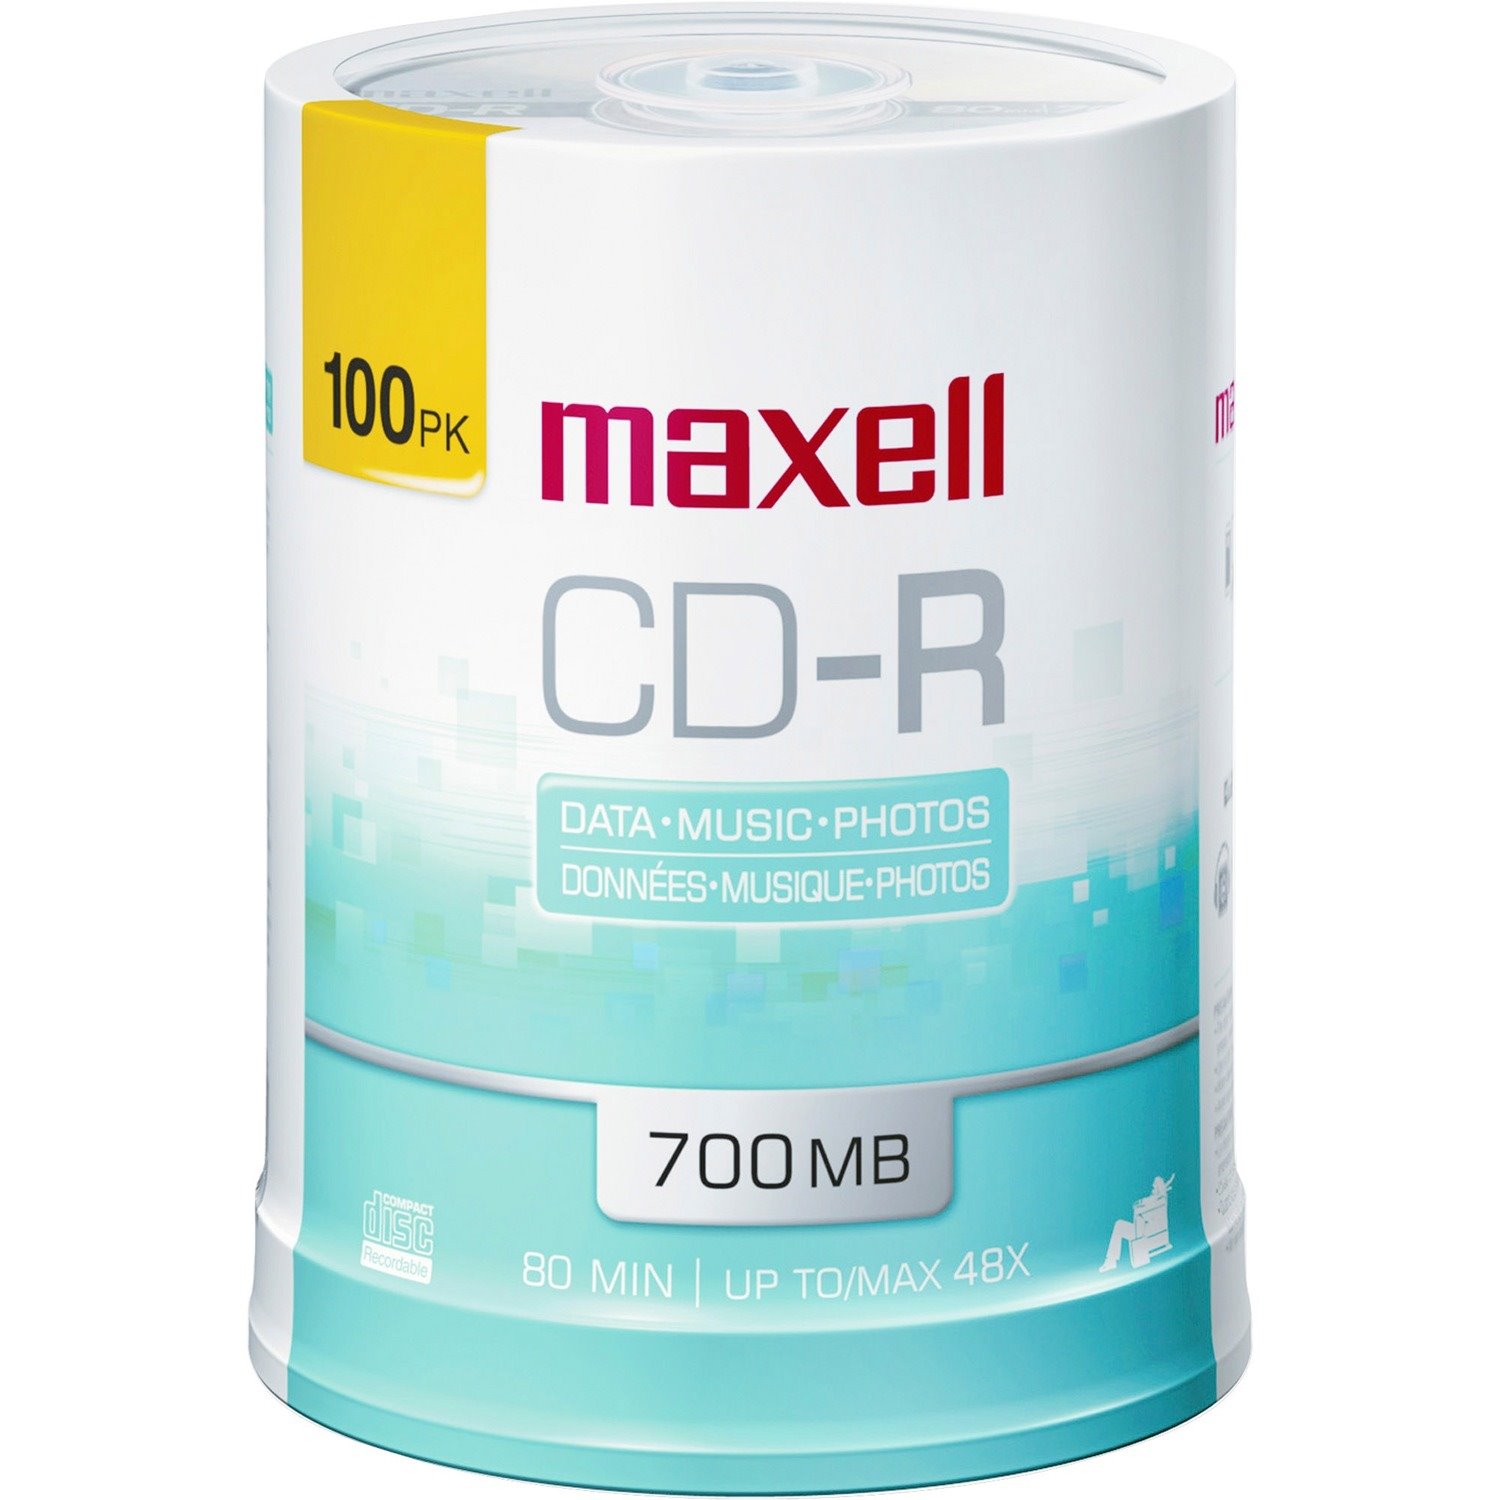 Maxell CD Recordable Media - CD-R - 48x - 700 MB - 100 Pack Spindle - White